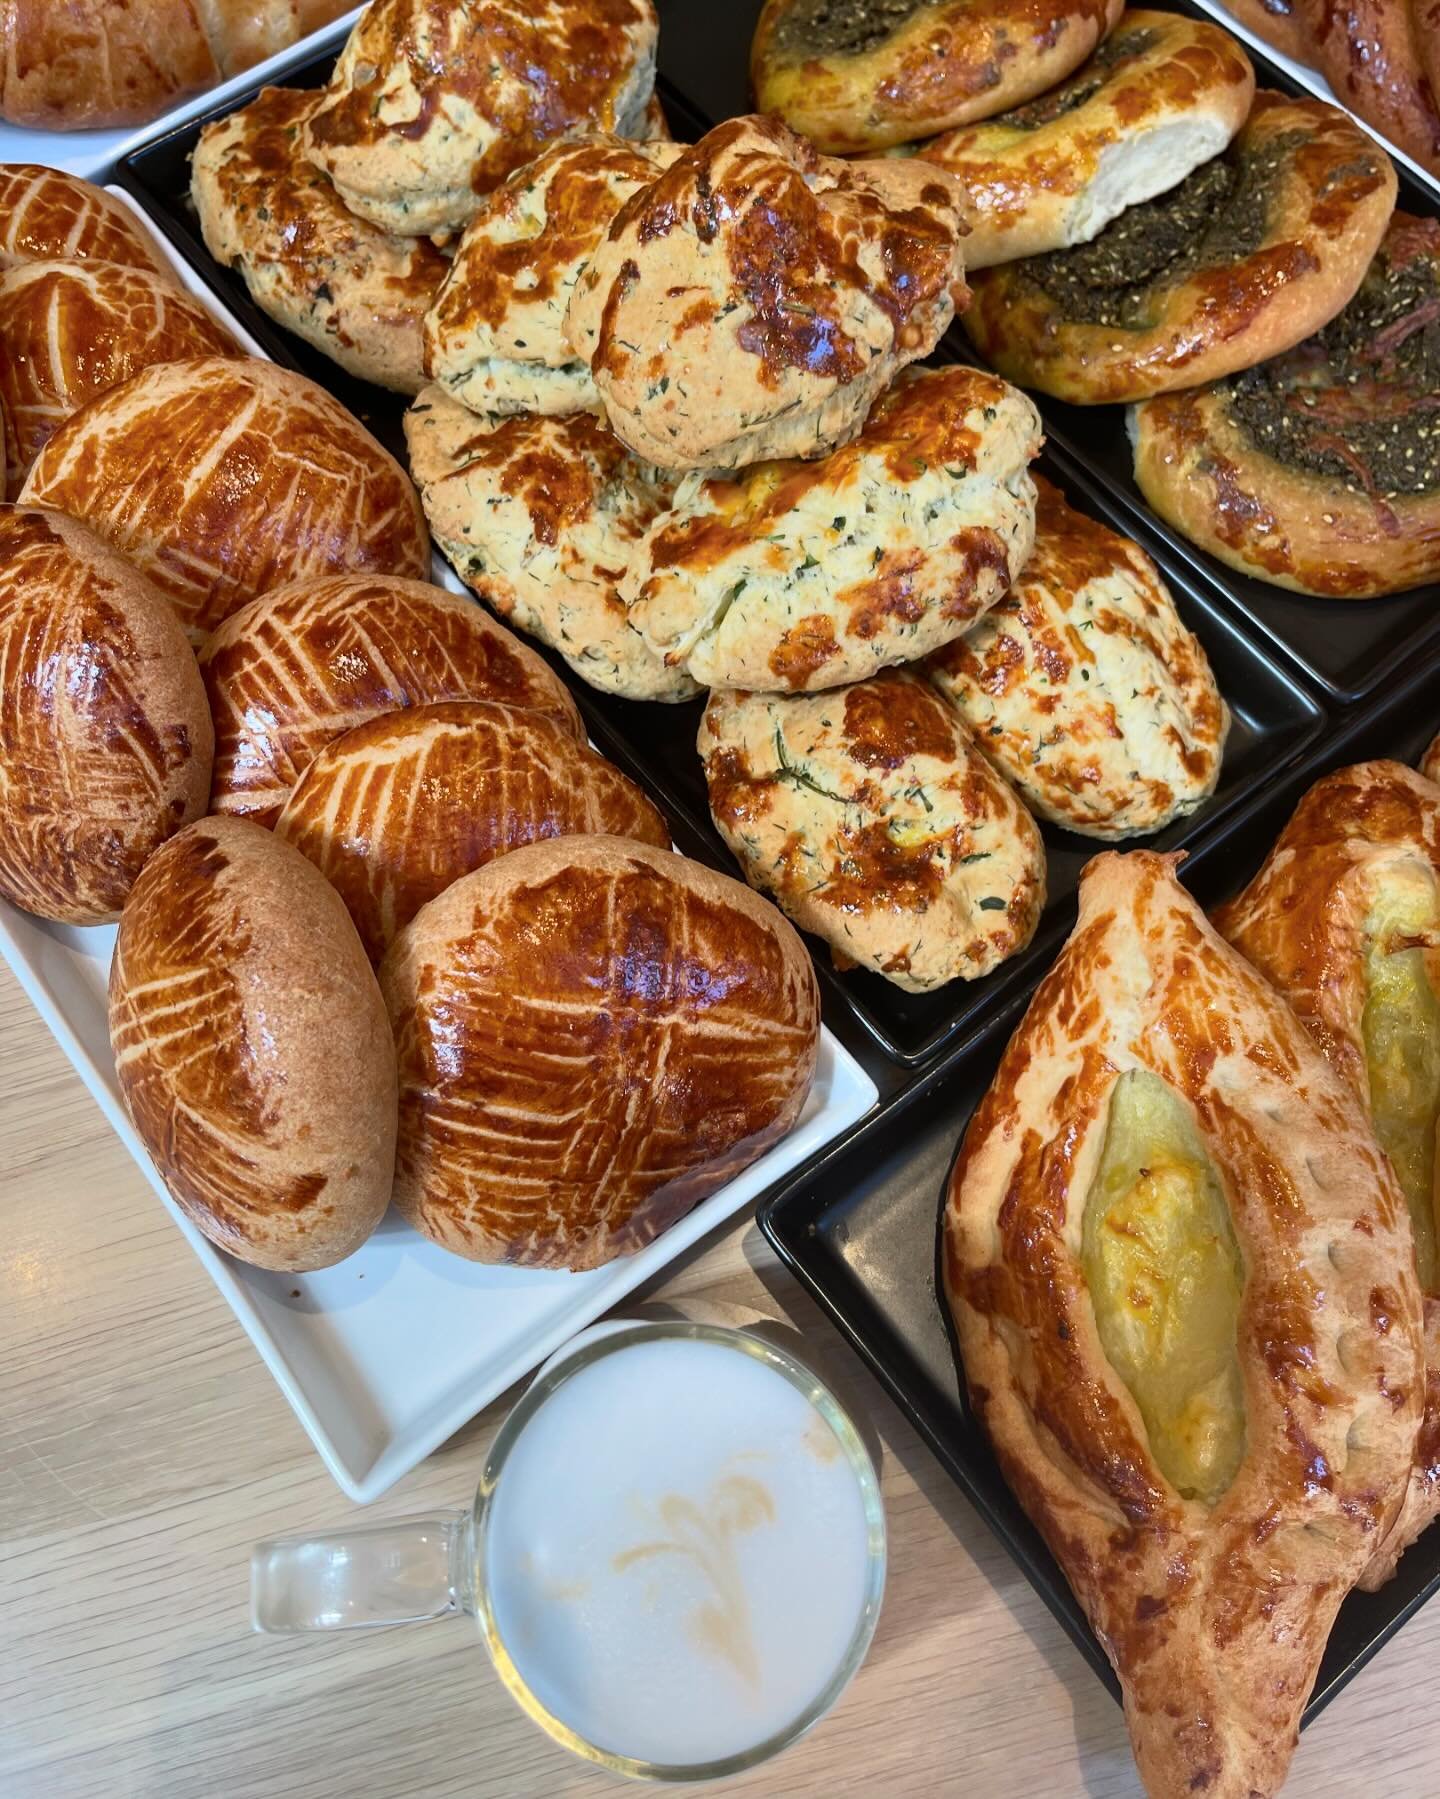 Something&rsquo;s brewing (pun intended) ☕️☺️

Introducing our house made pastry line up. 

Visit our Stanford shopping center location to see what we&rsquo;re working on 🛠️

Hummus Caf&eacute; opening soon..